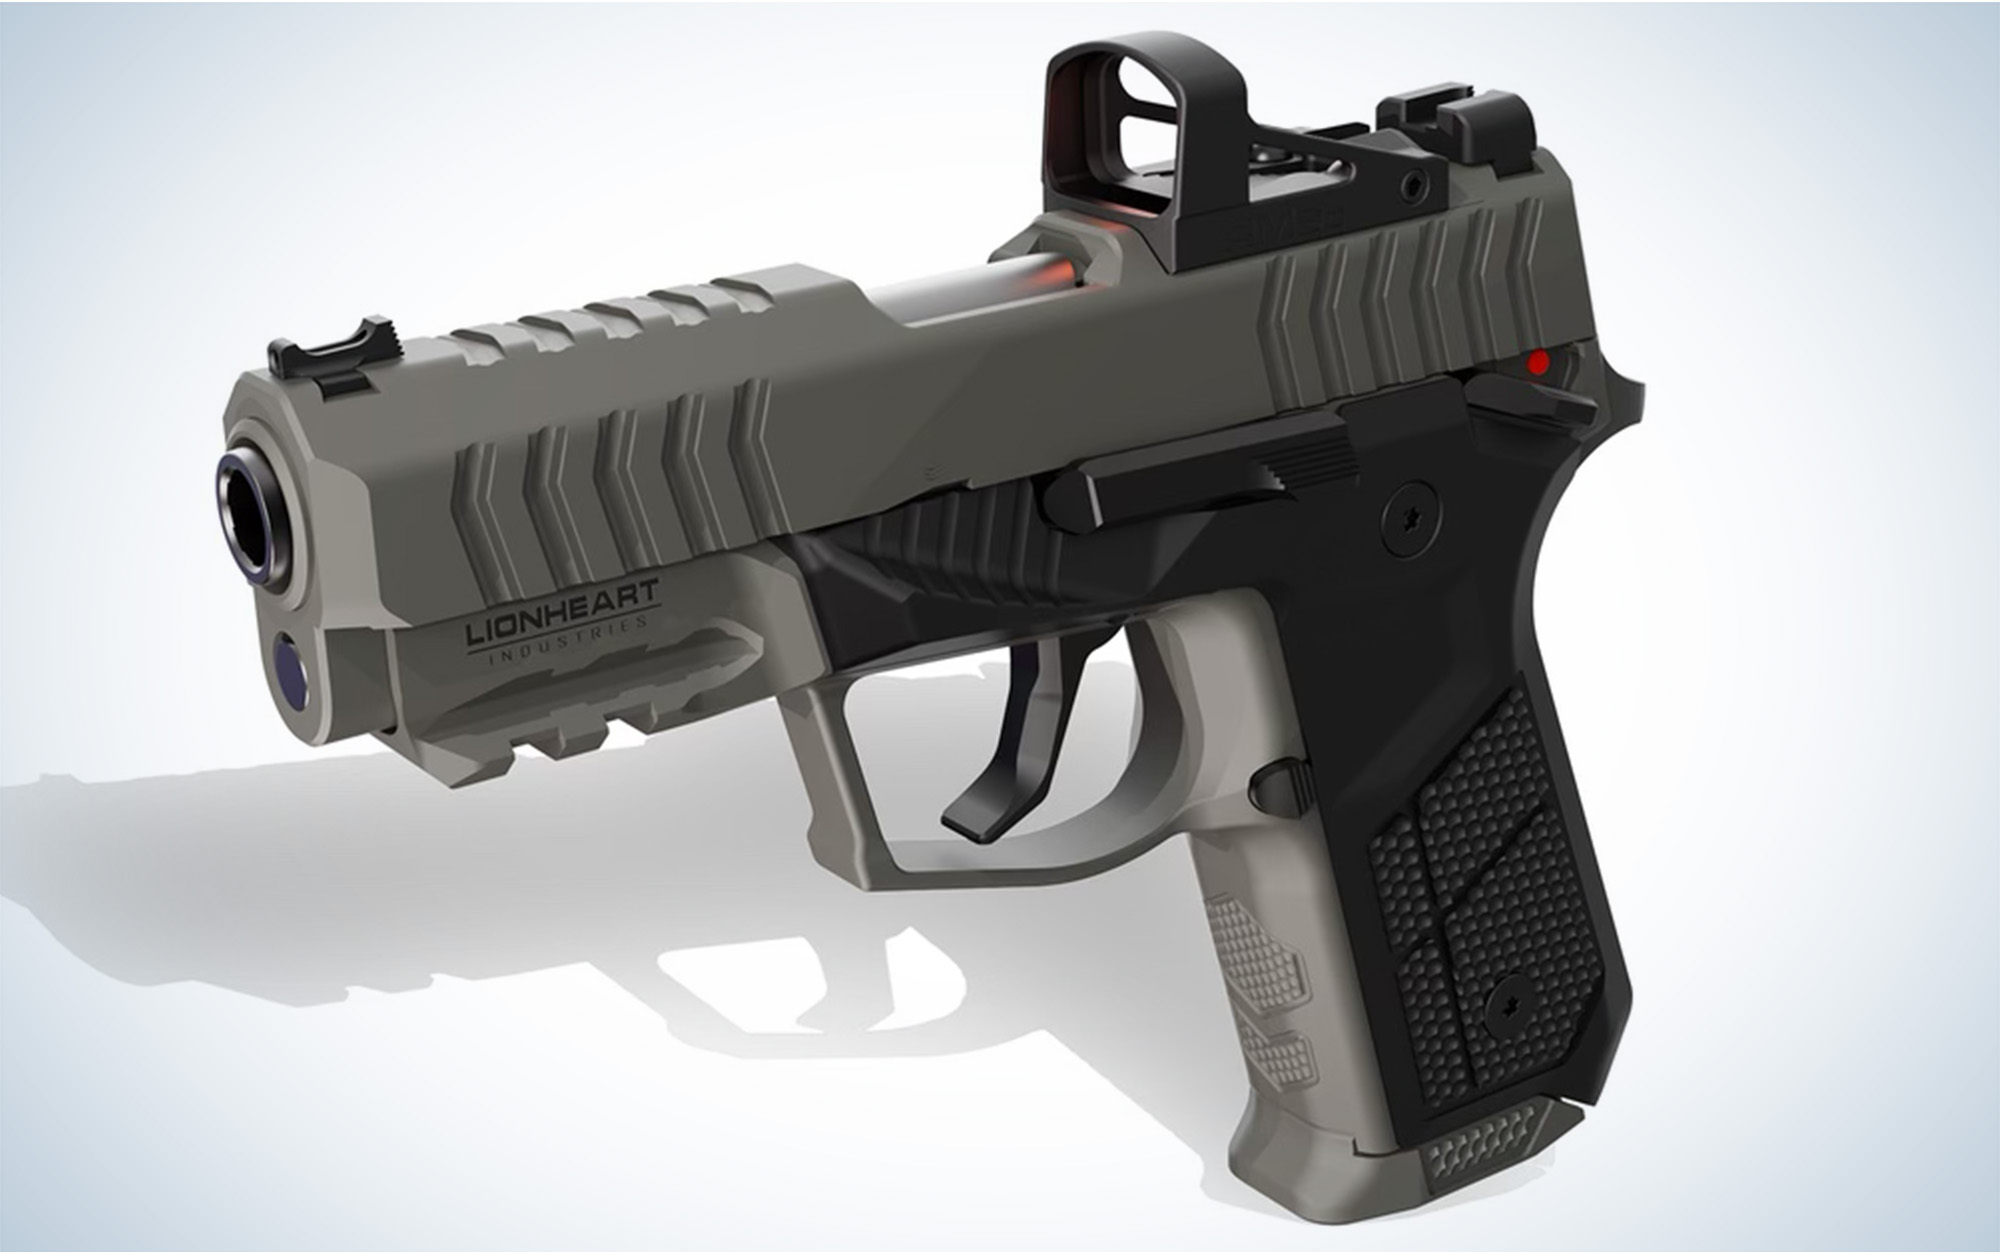 The Lionheart Industries Vulcan 9 is one of the new handguns from SHOT Show 2023.